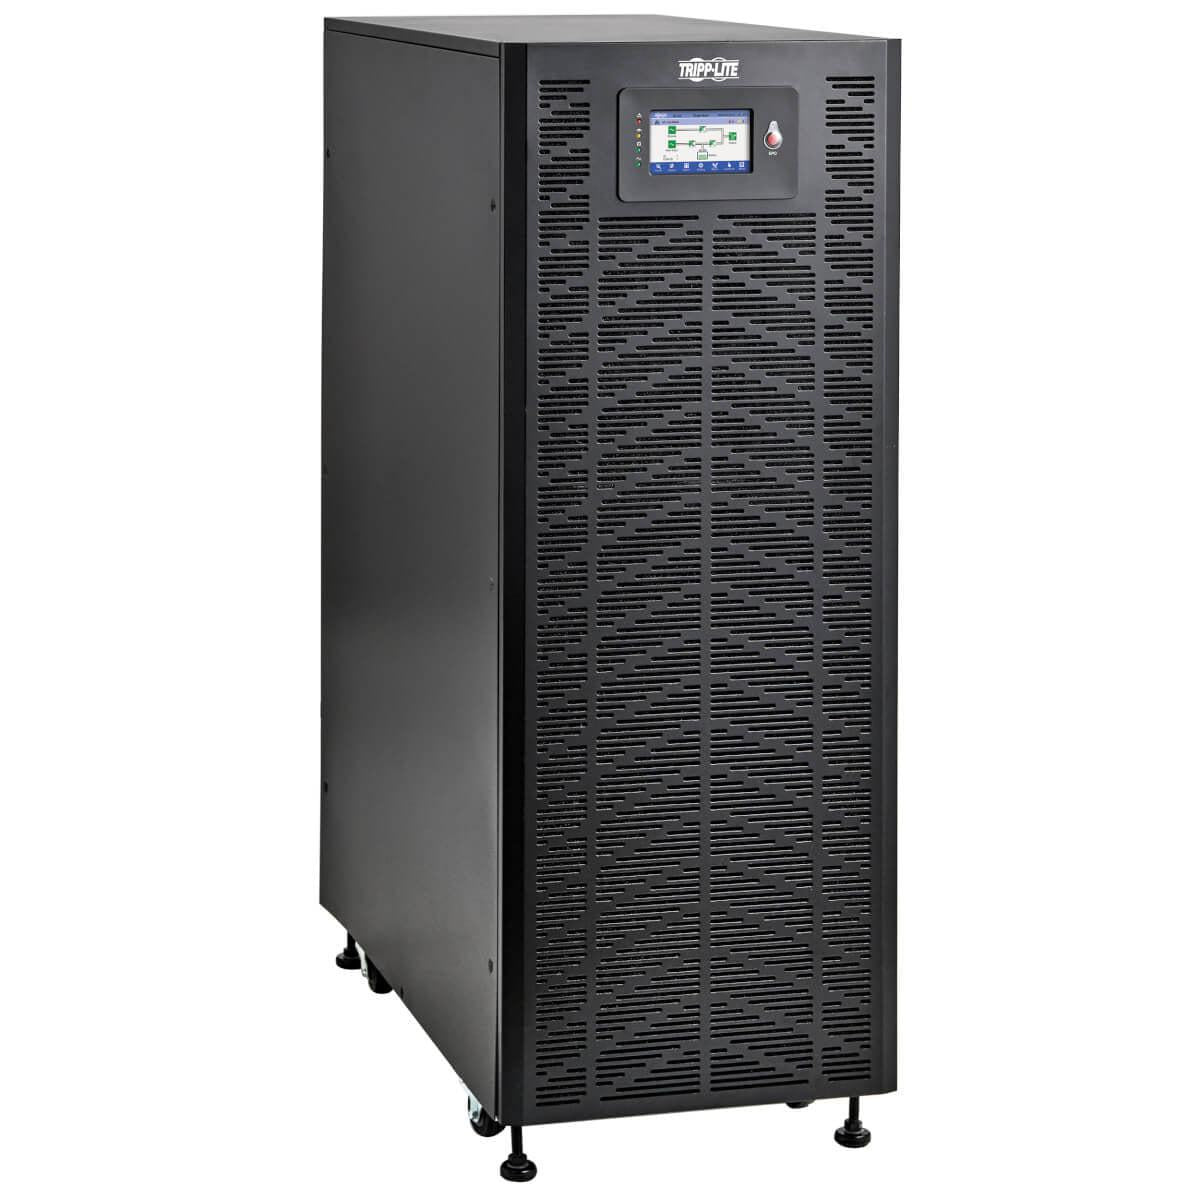 Tripp Lite 3-Phase 208/220/120/127V 50Kva/Kw Double-Conversion Ups - Unity Pf, External Batteries Required